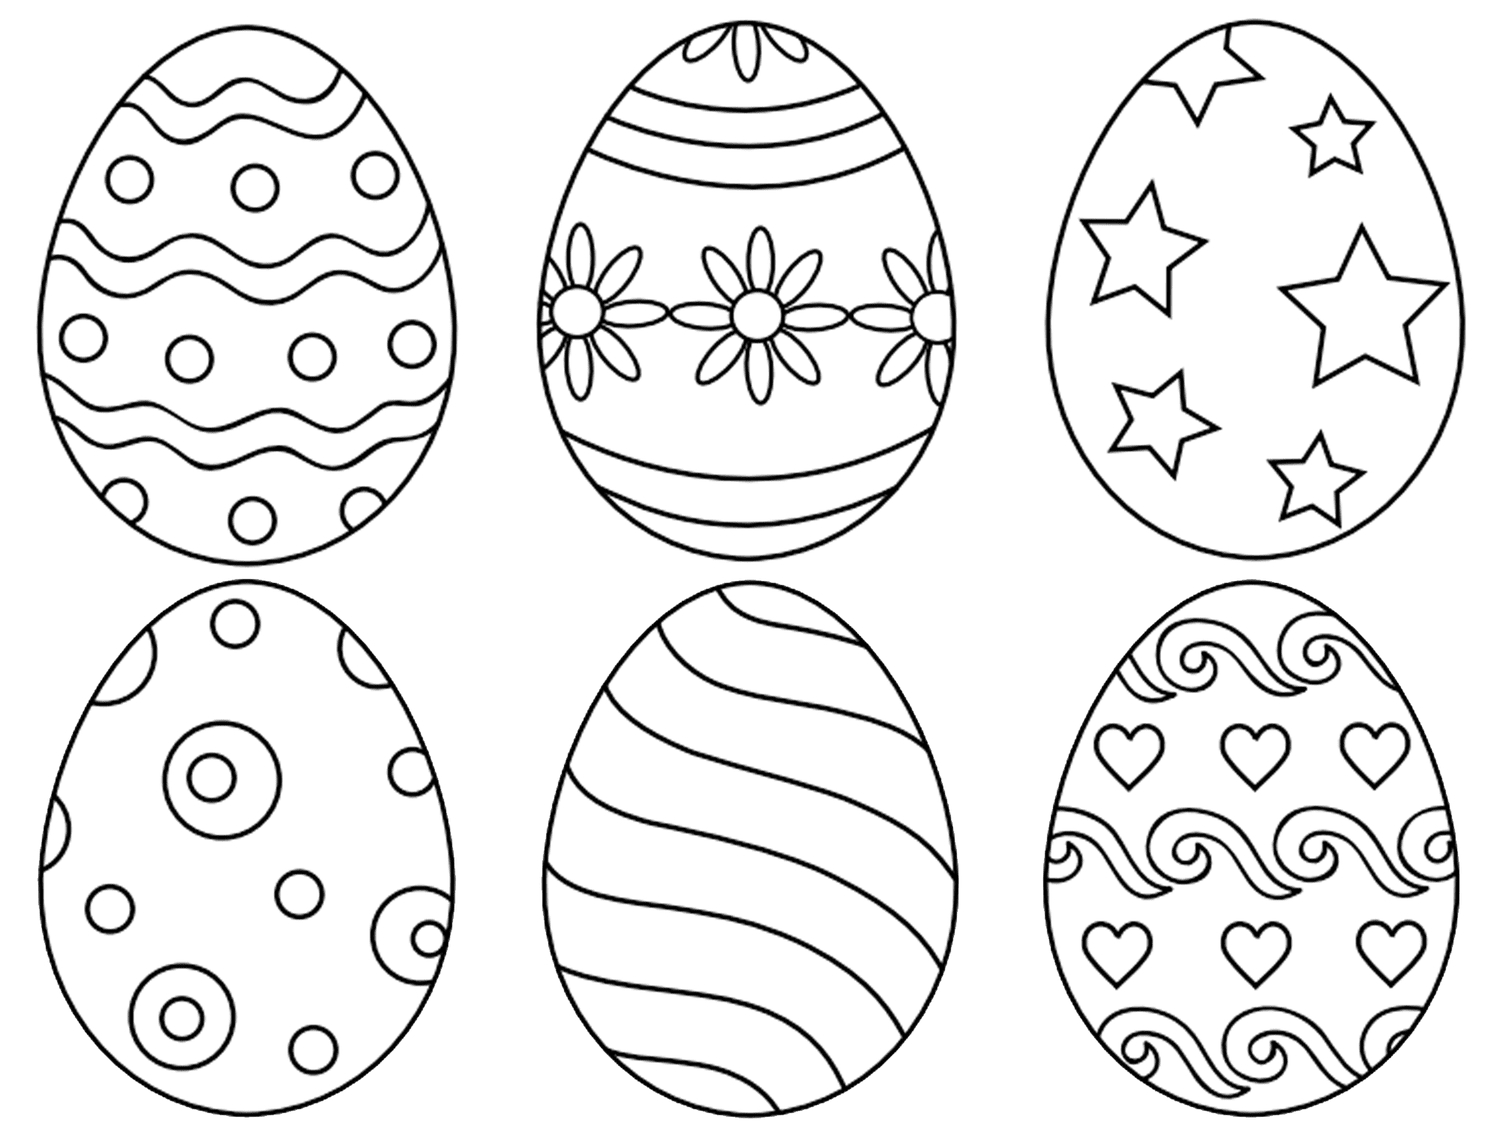 9 Places For Free, Printable Easter Egg Coloring Pages intended for Easter Egg Coloring Pages Free Printable